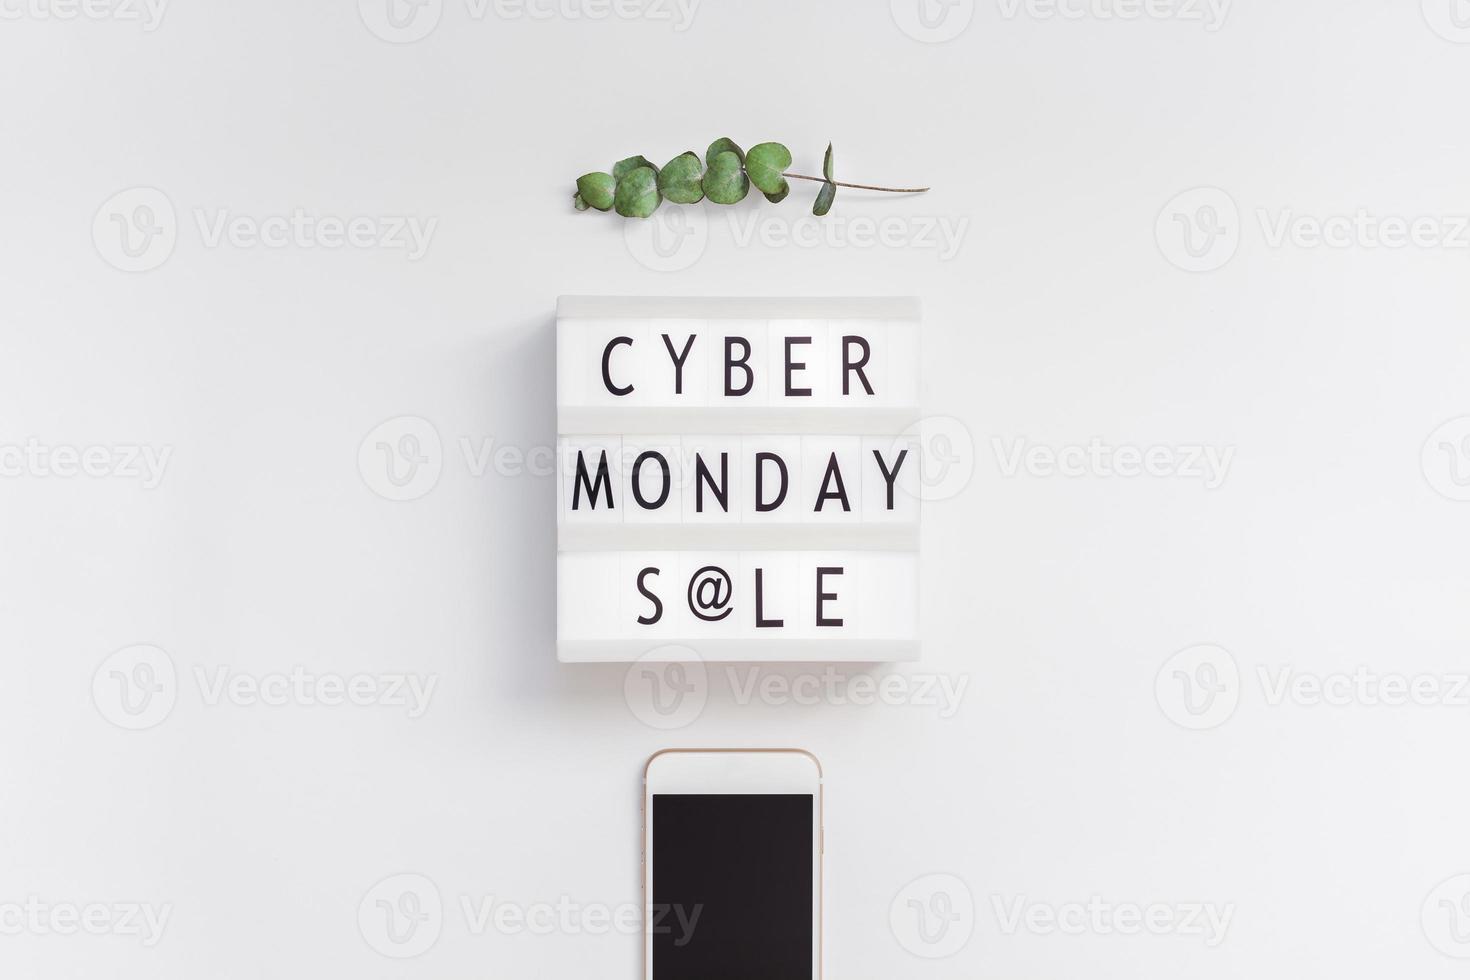 Cyber Monday sale text on white lightbox photo